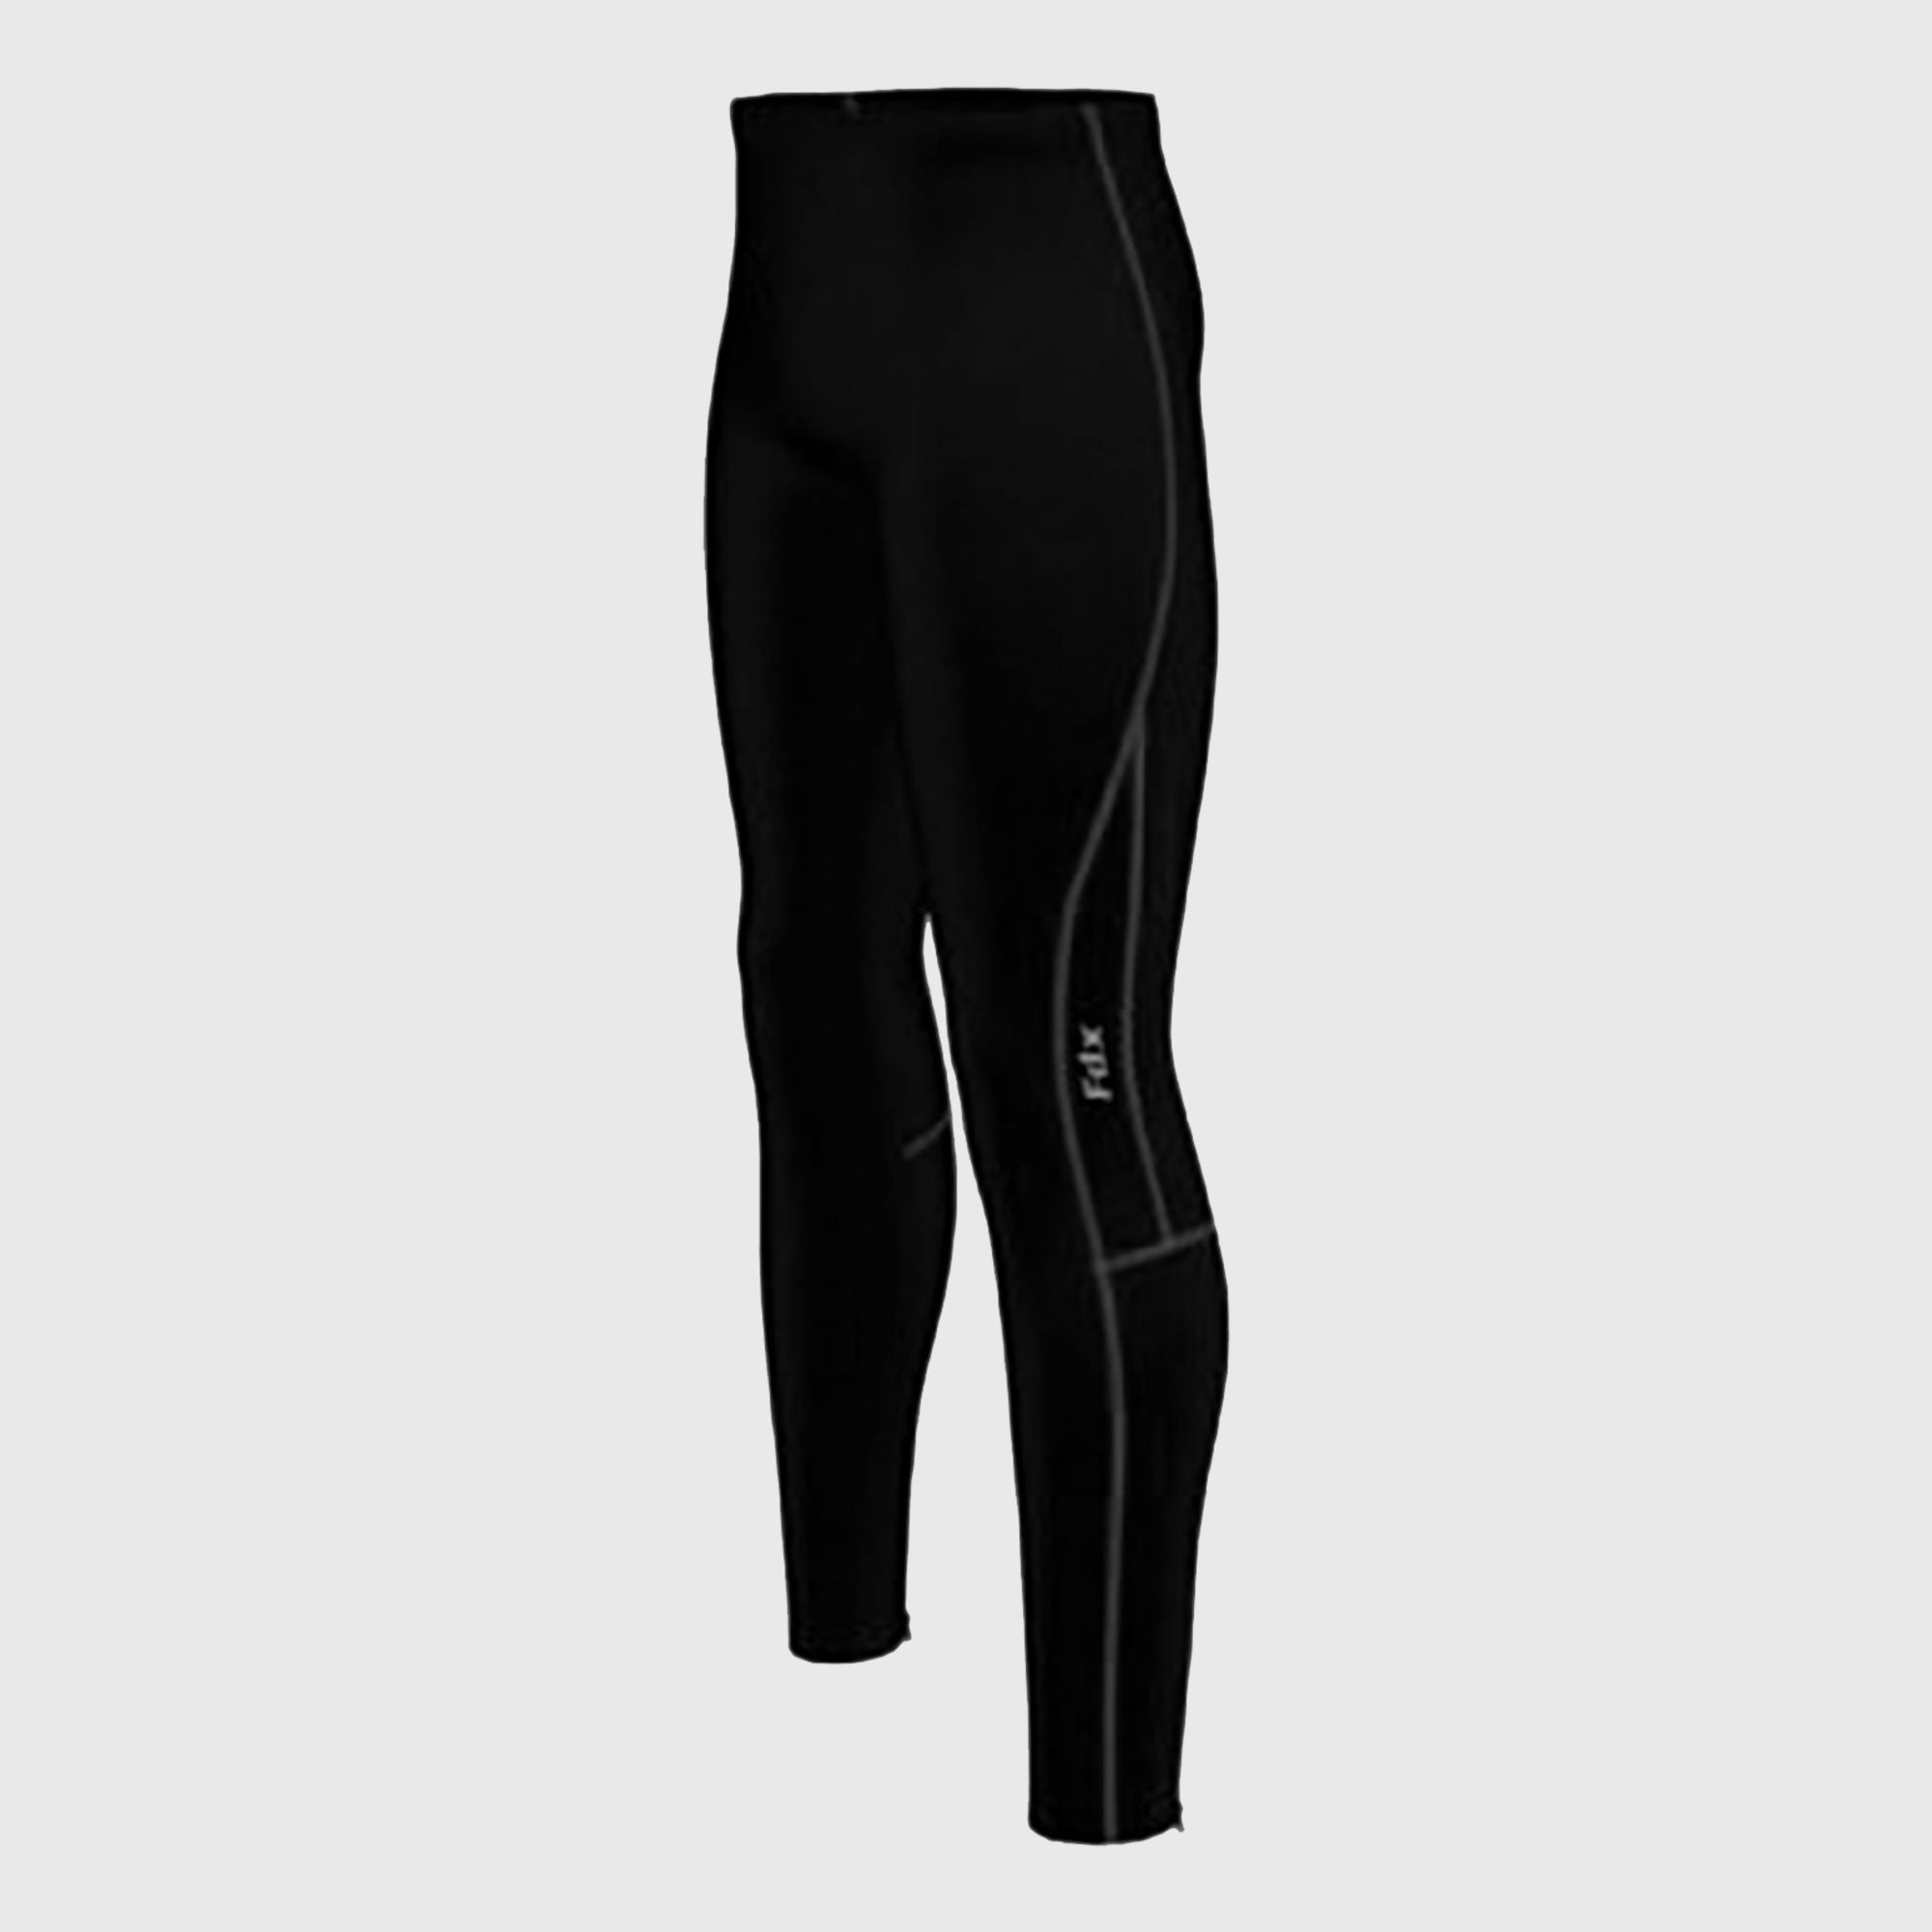 Men's Thermal Compression Pants, Athletic Sports Leggings & Running Tights,  Wintergear Base Layer Bottom - black